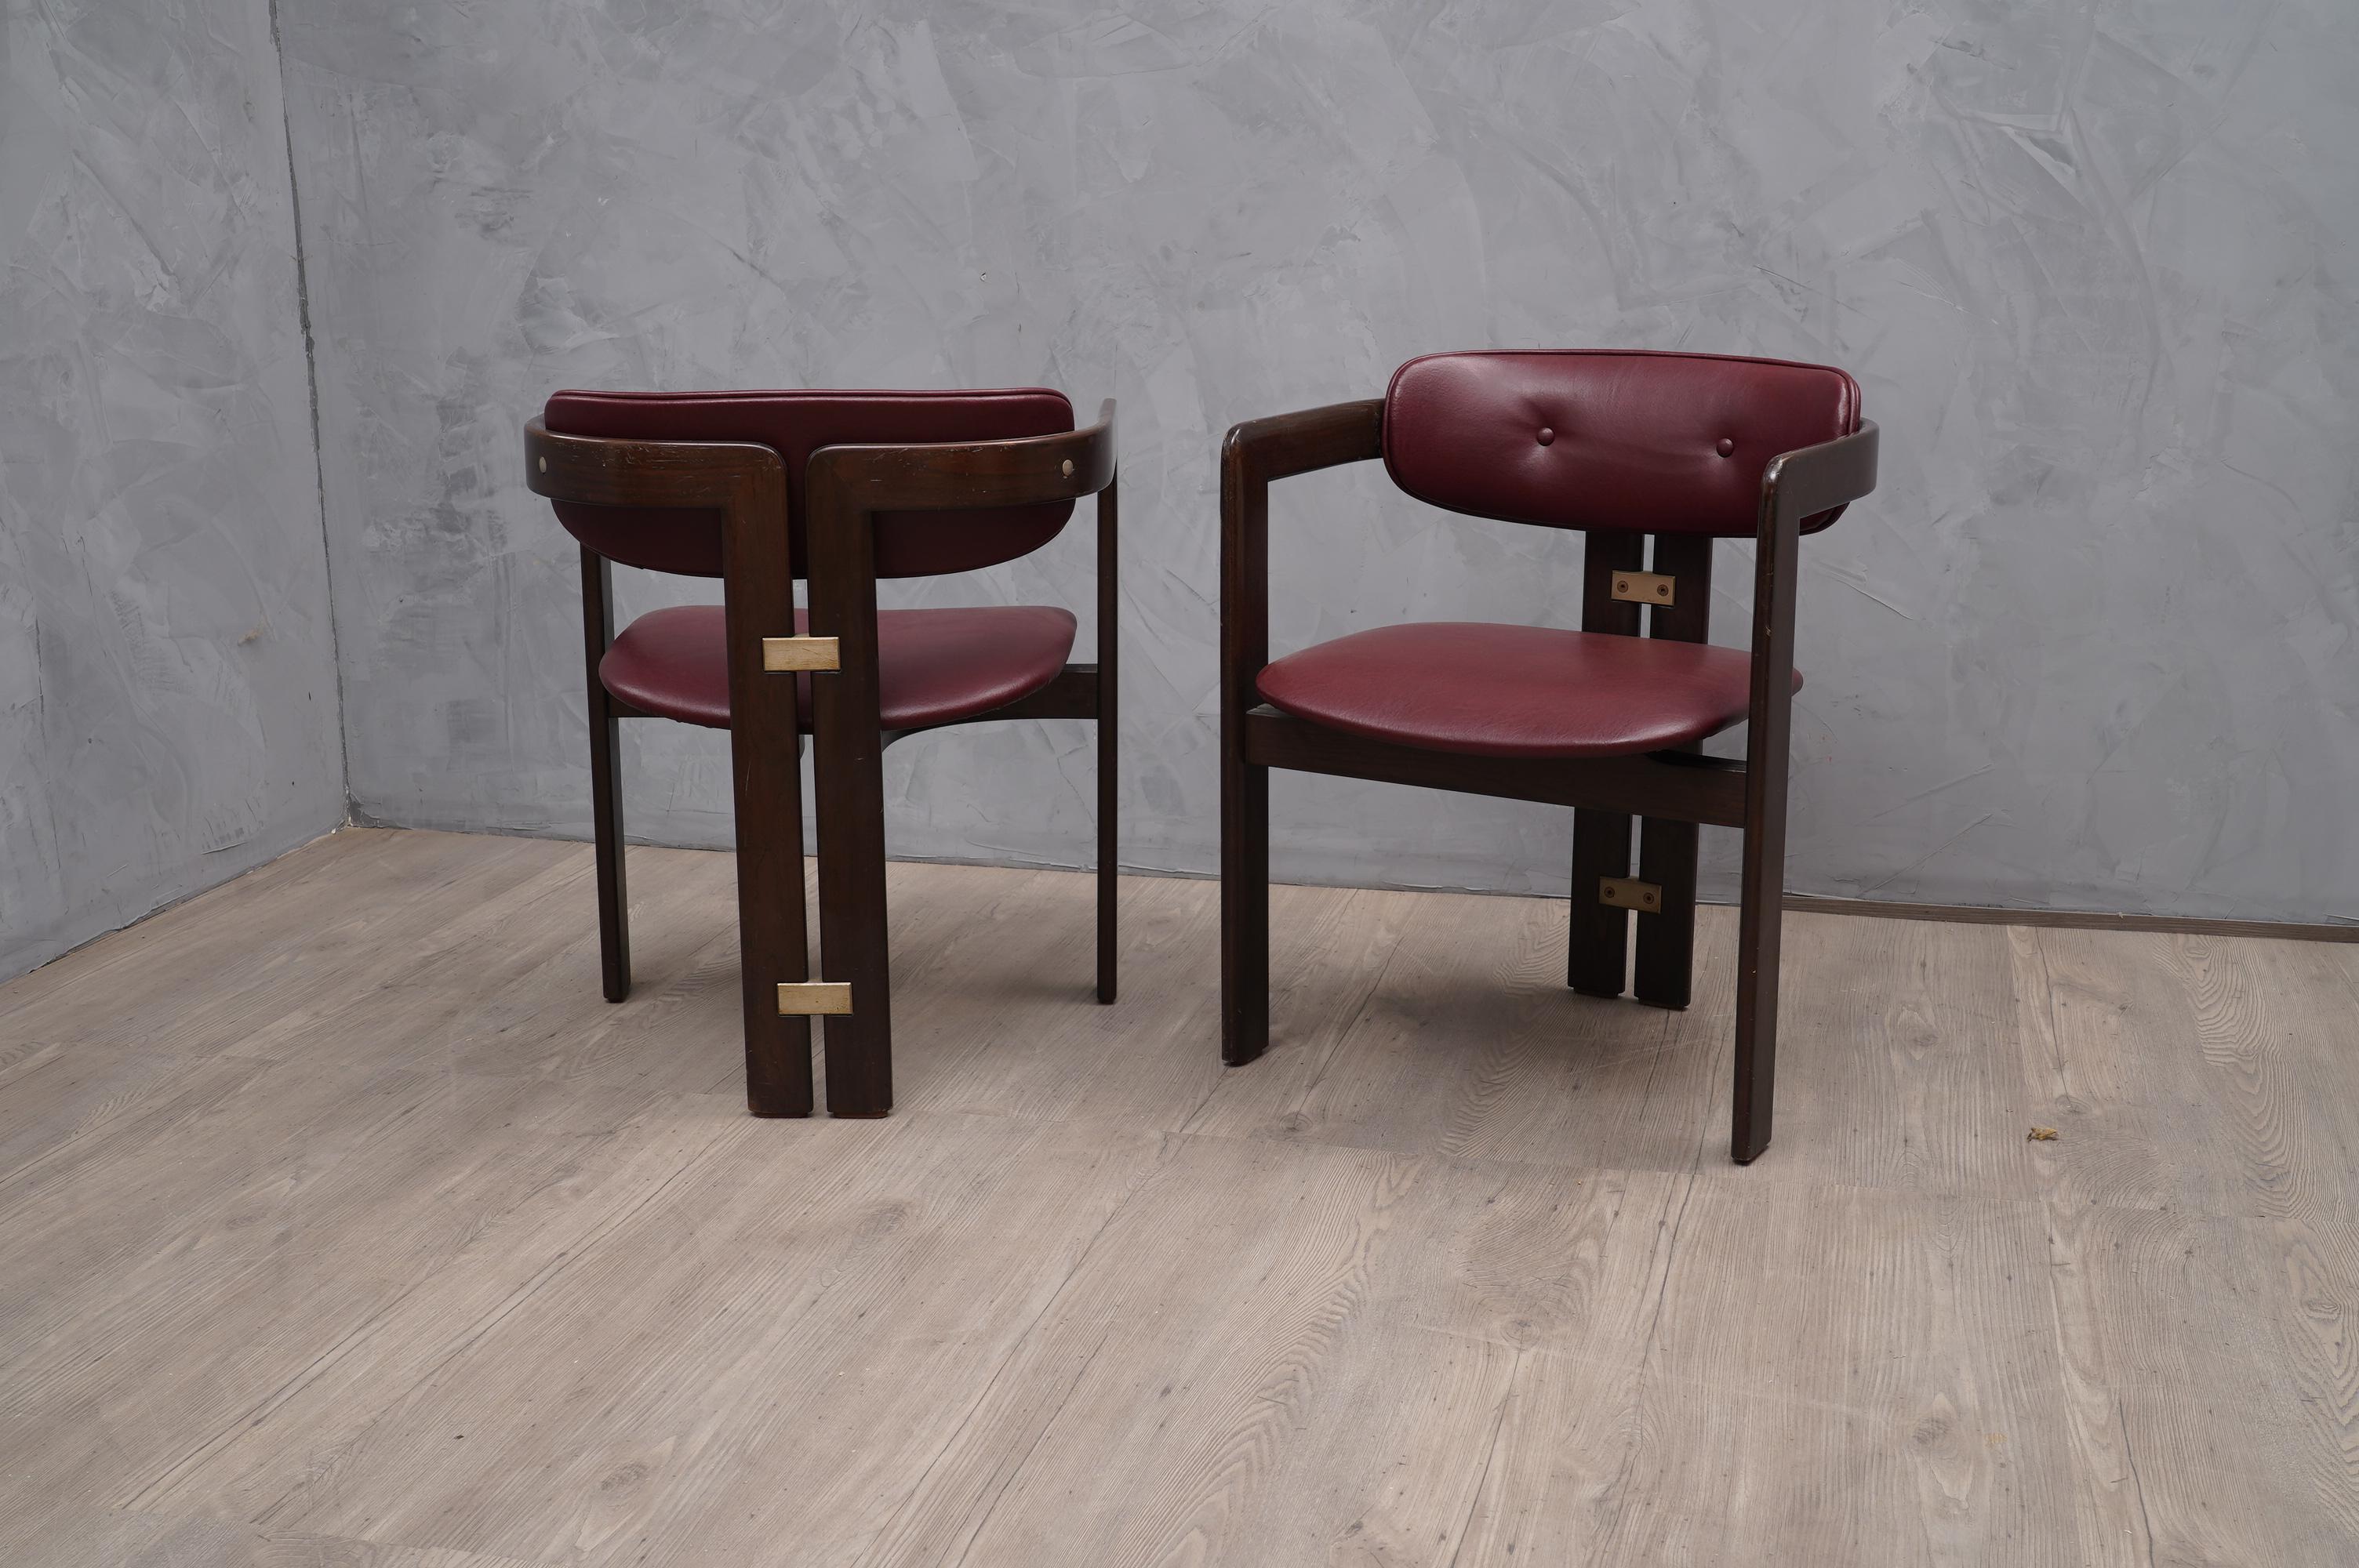 Wonderful pair of chairs with armrests, due both to the design of the structure and to the use of fine materials.

The chairs are formed by two wooden structures joined at the rear by two metal inserts and at the front by a wooden loop on which the